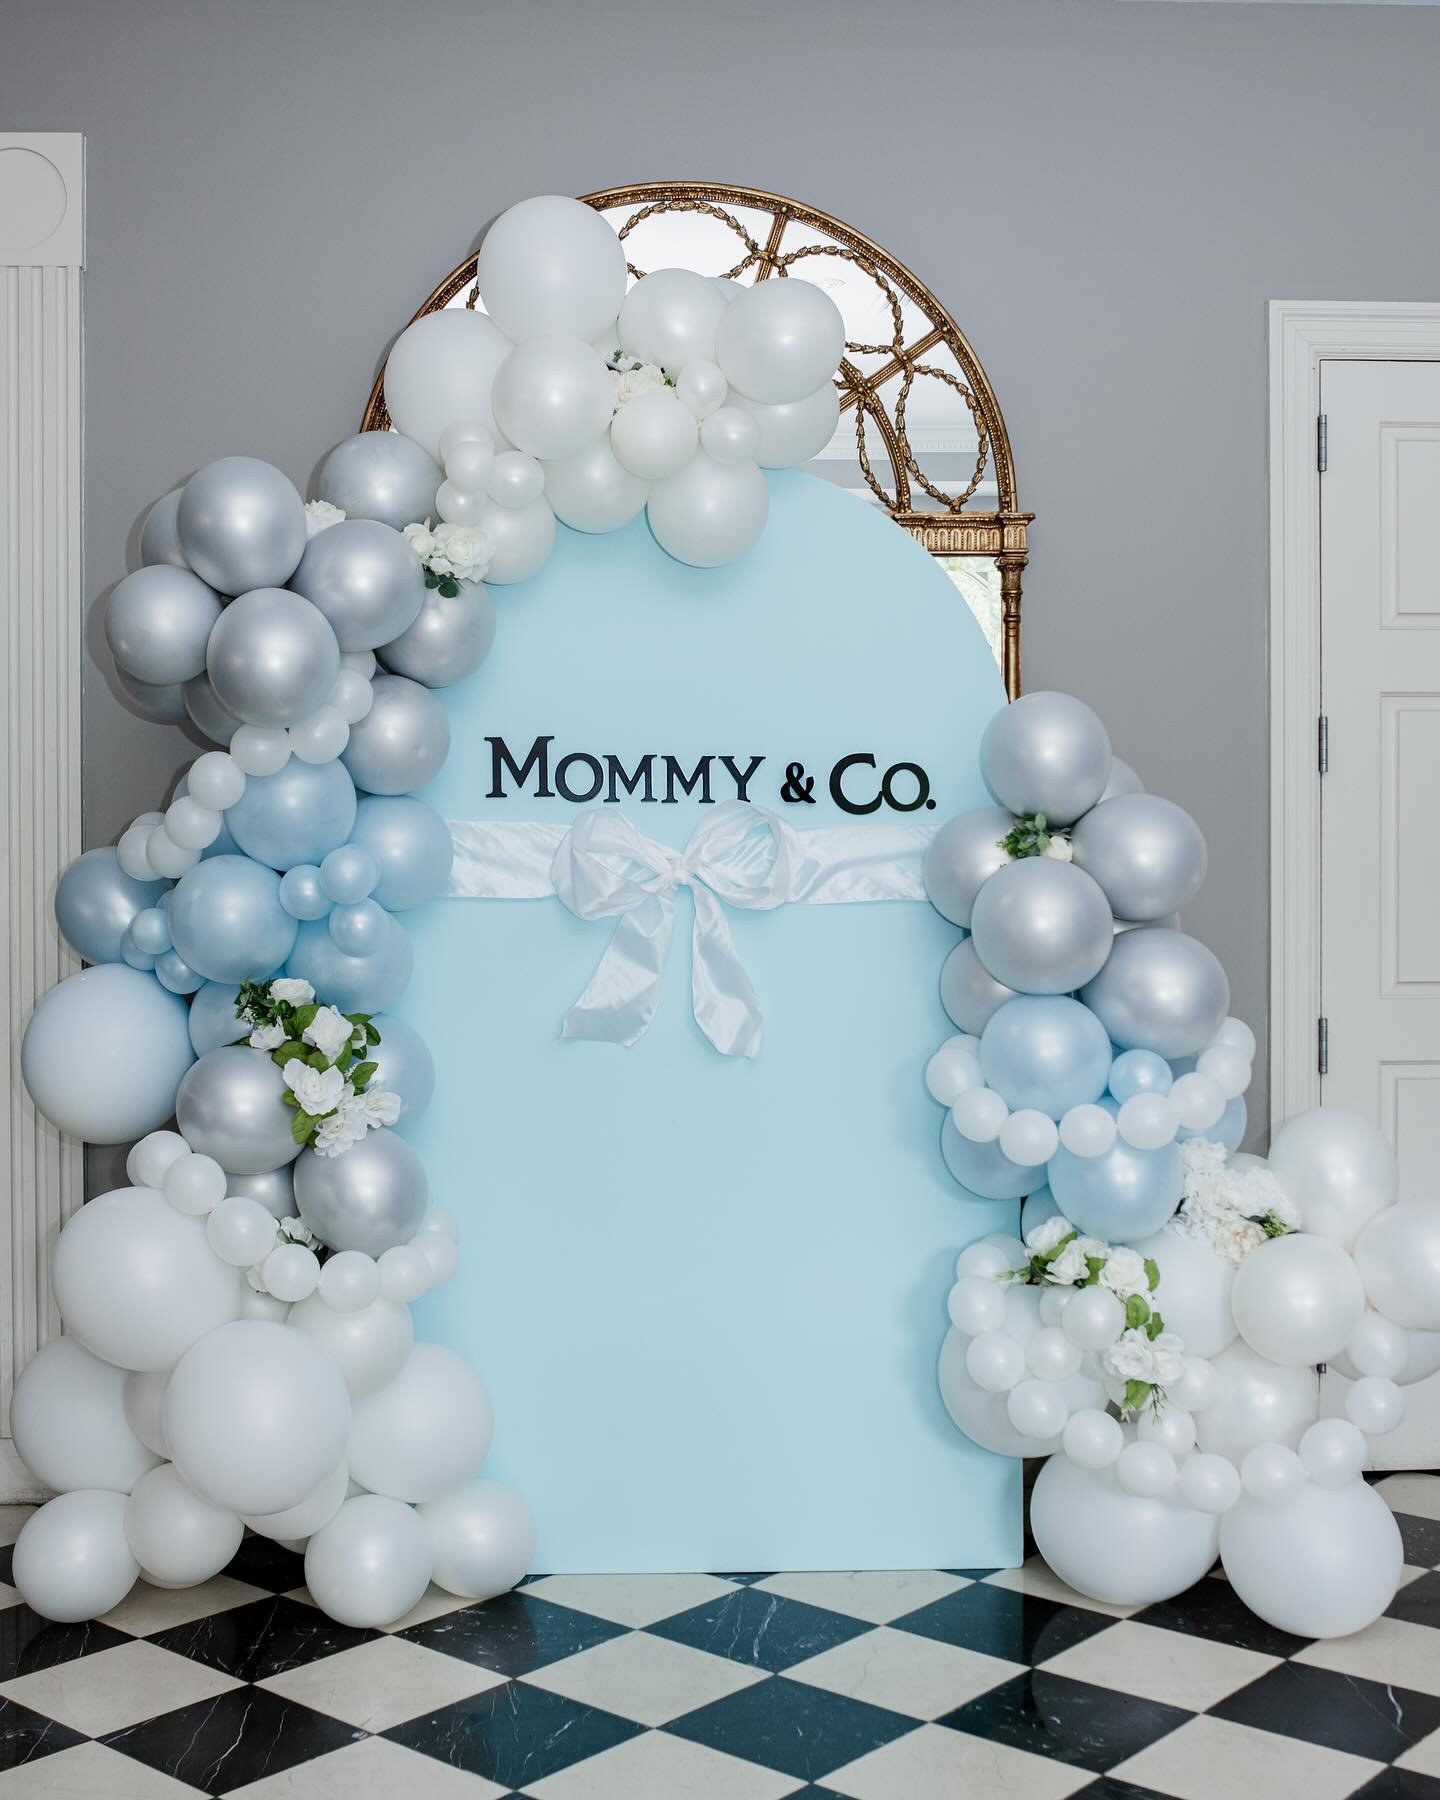 🩵 MOMMY &amp; CO. RECAP 🩵

✨ Event Design + Balloons @partywithlex 
✨ Venue &amp; Catering @thelegendscc 
✨ Photography @unrulyblooms.co 
✨ Videography  @forevermoore_photoandfilm 
✨ Movie Screen + Soft Play @cloudninestlouis 
✨ Photo Booth @moment